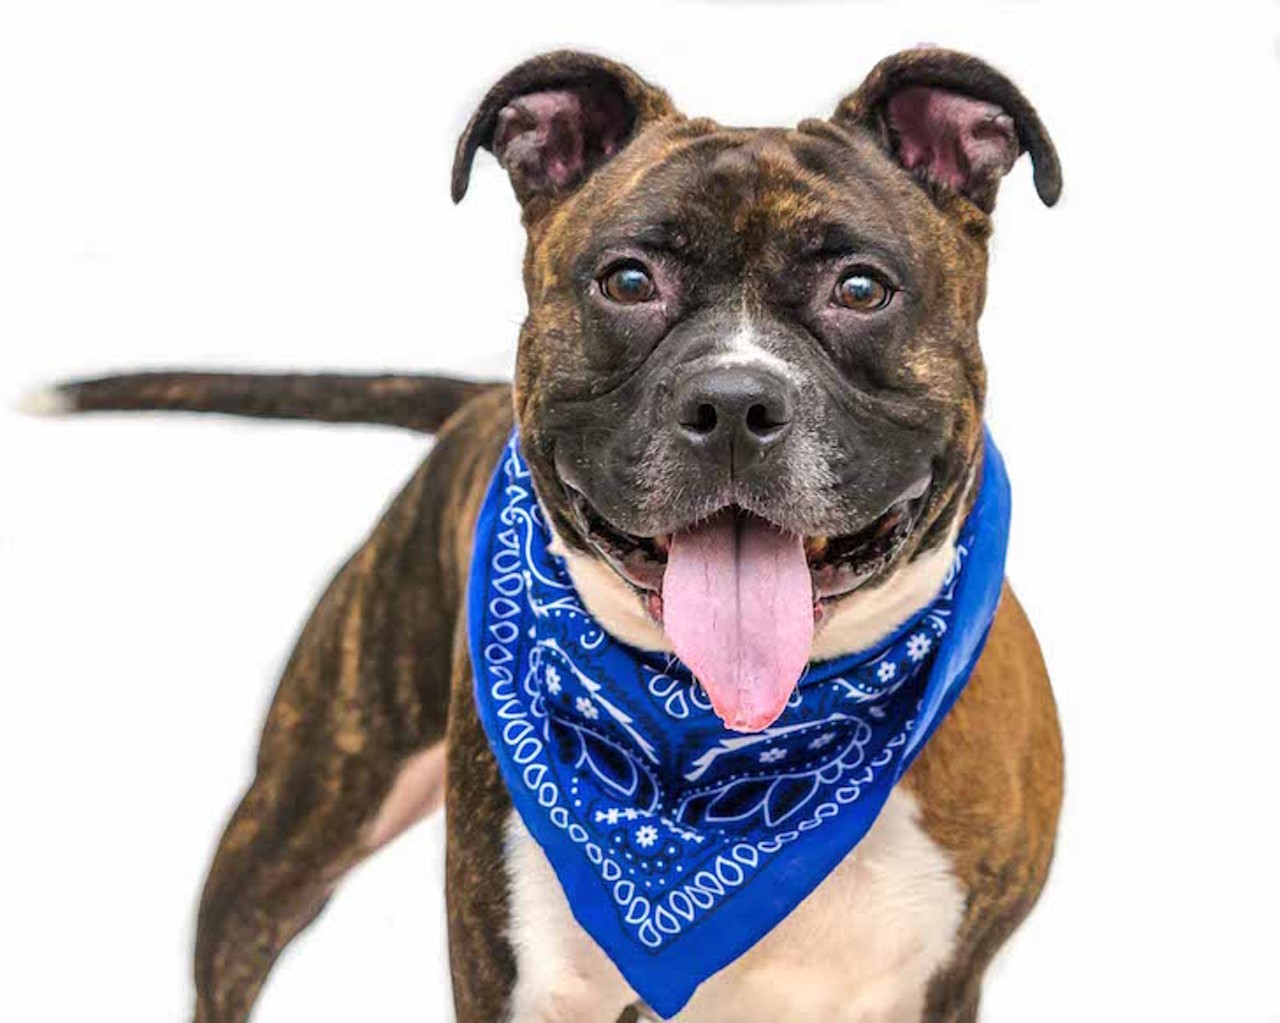 22 adoptable dogs looking for a new companion